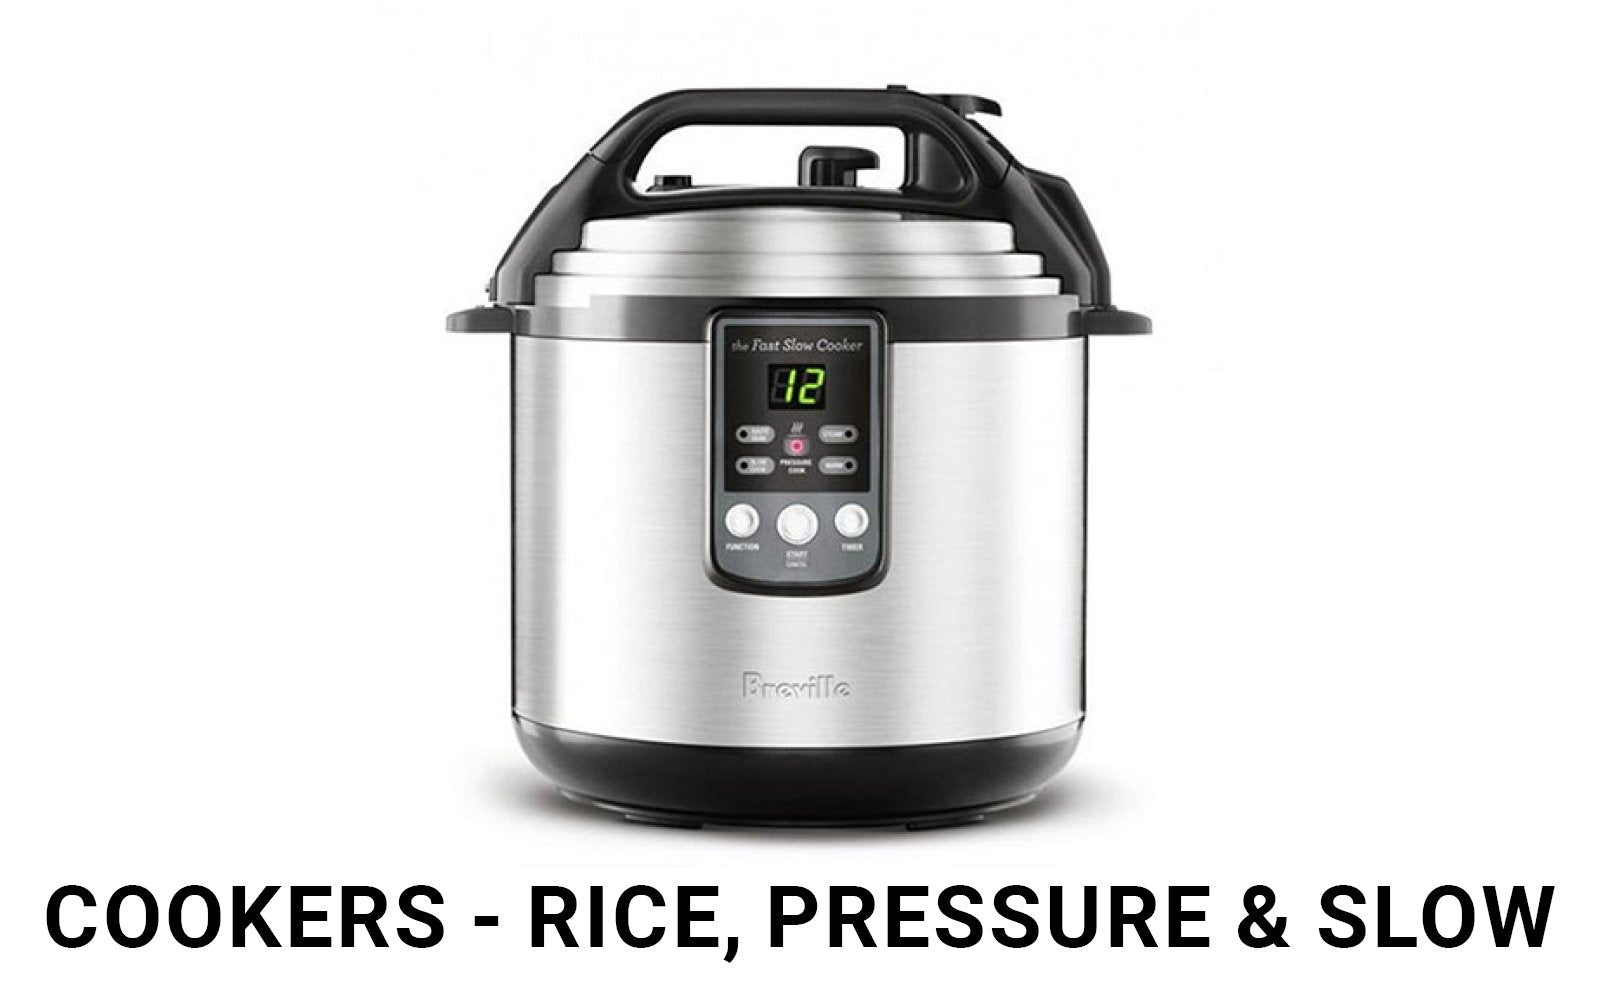 Cookers - Rice, Pressure & Slow